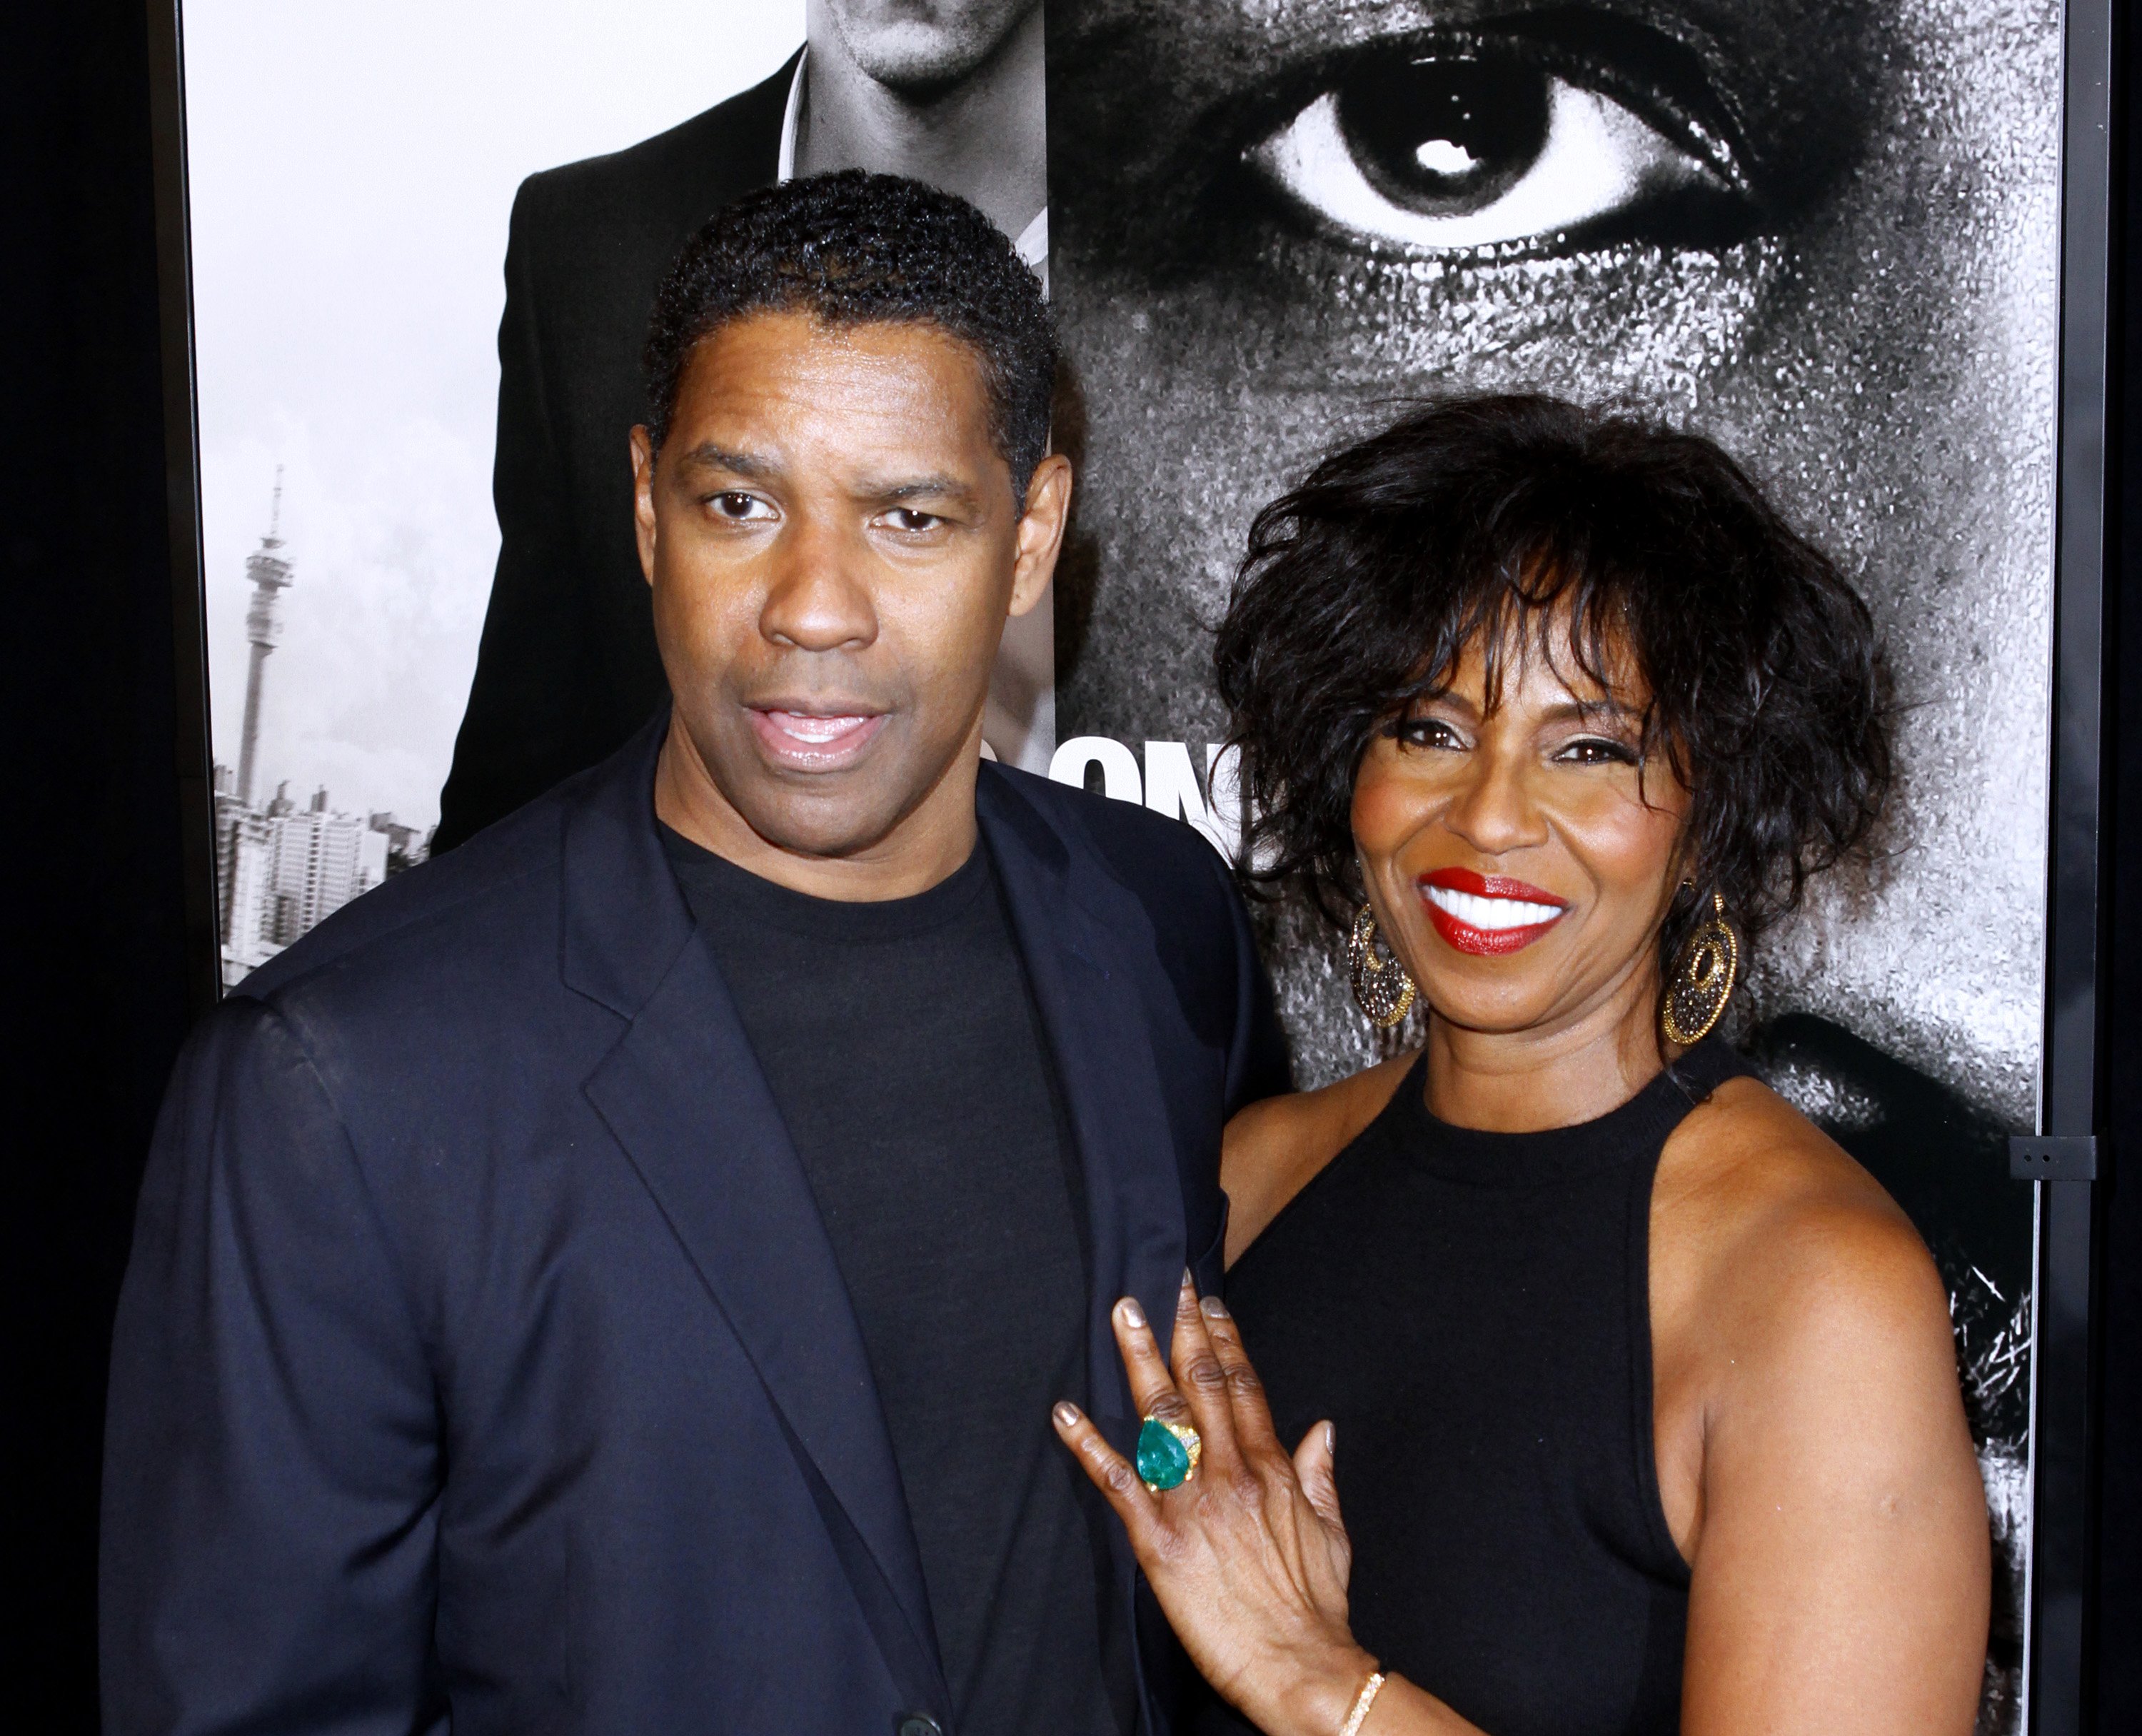 Denzel Washington and Pauletta Washington at "safe house" premiered in 2012 |  Source: Getty Images